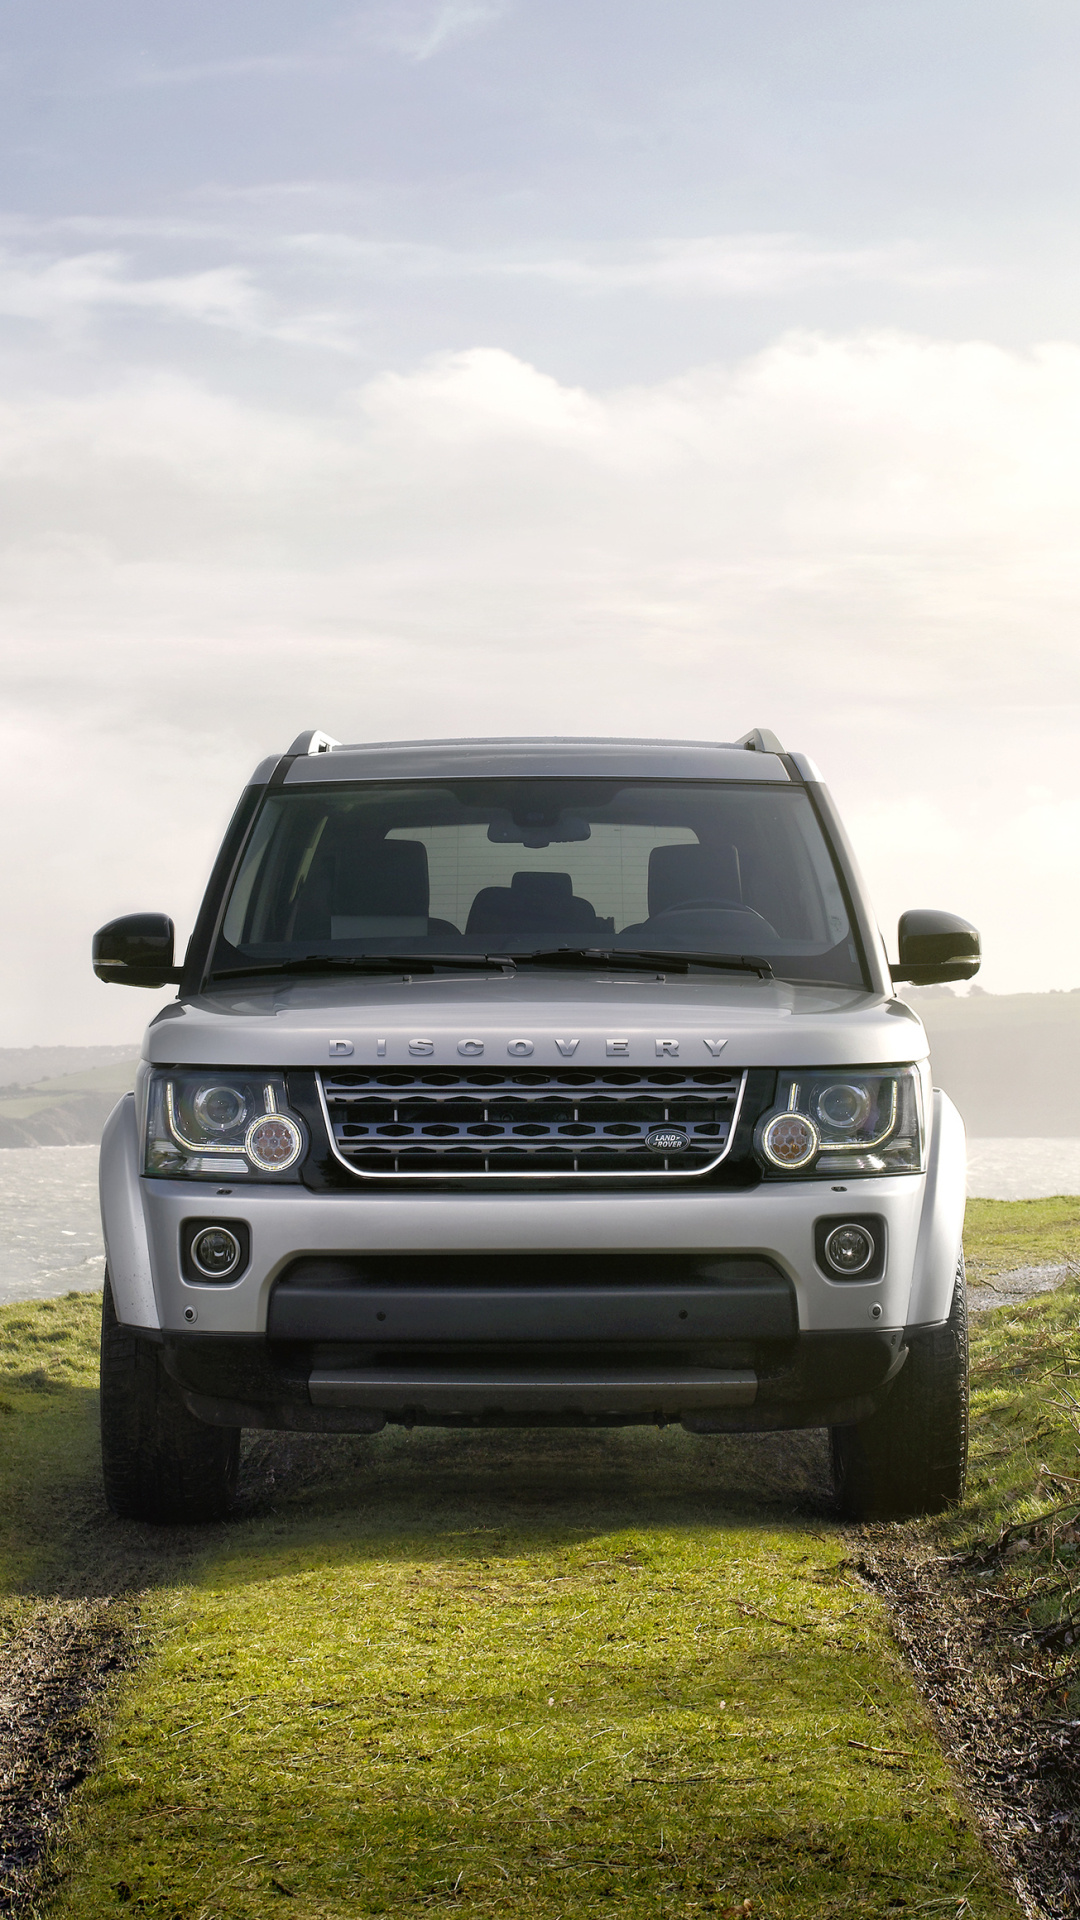 Land Rover Discovery, Versatile vehicle, Off-road capabilities, 1080x1920 Full HD Handy